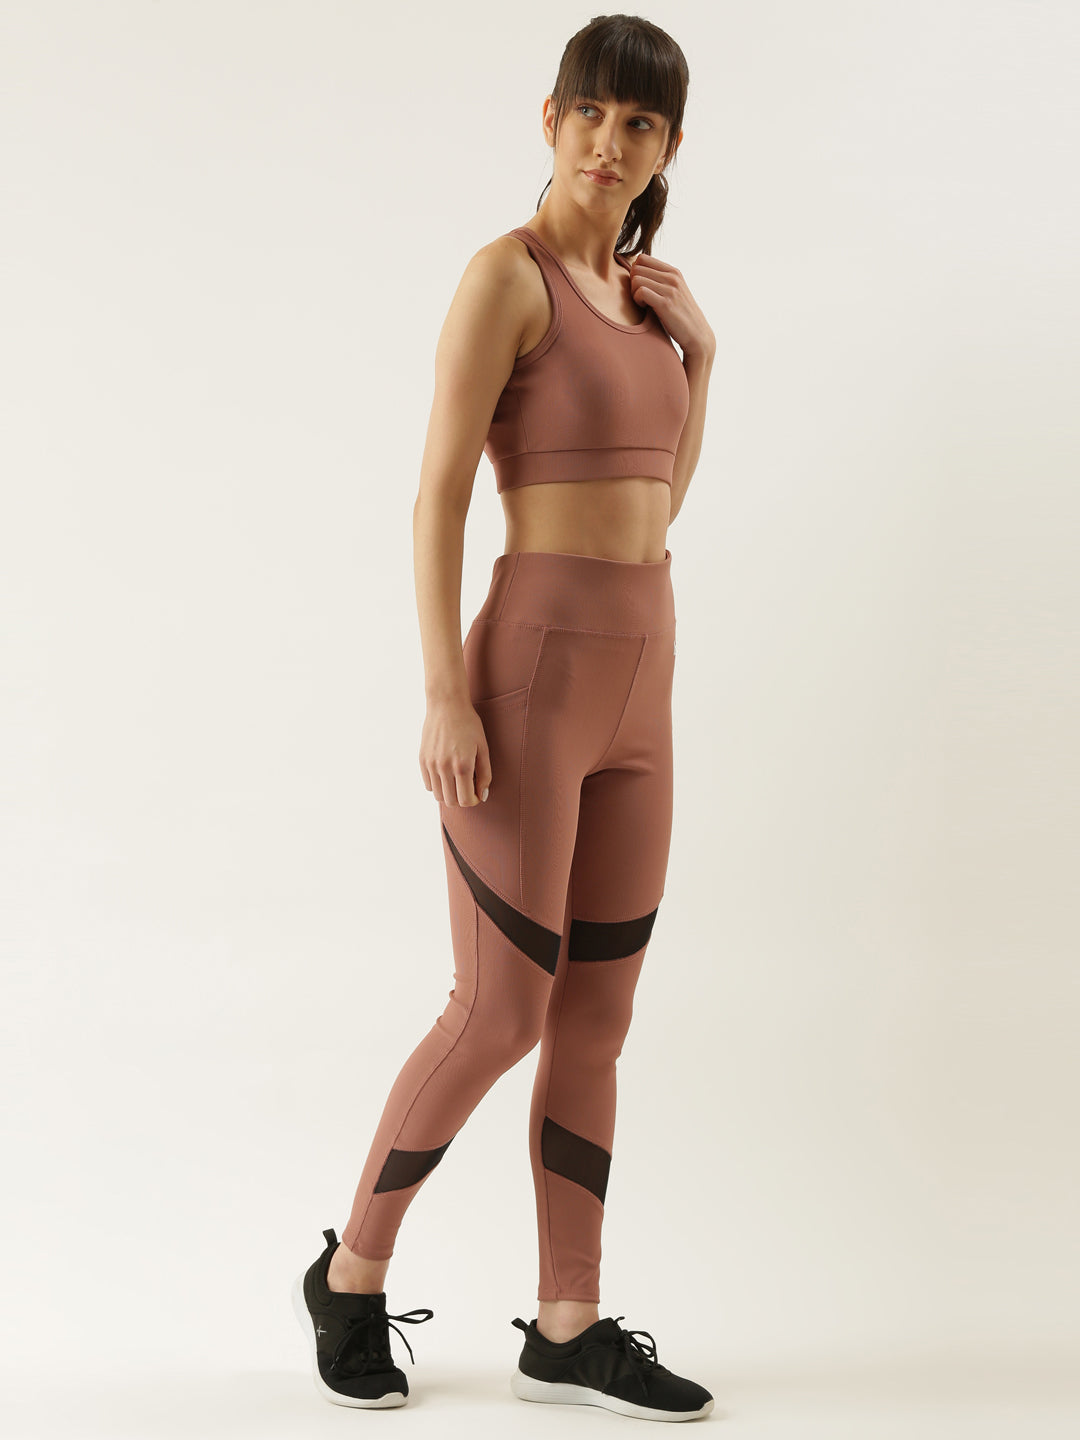 Women Nude Pink Tights And Sport bra Co-ord Set